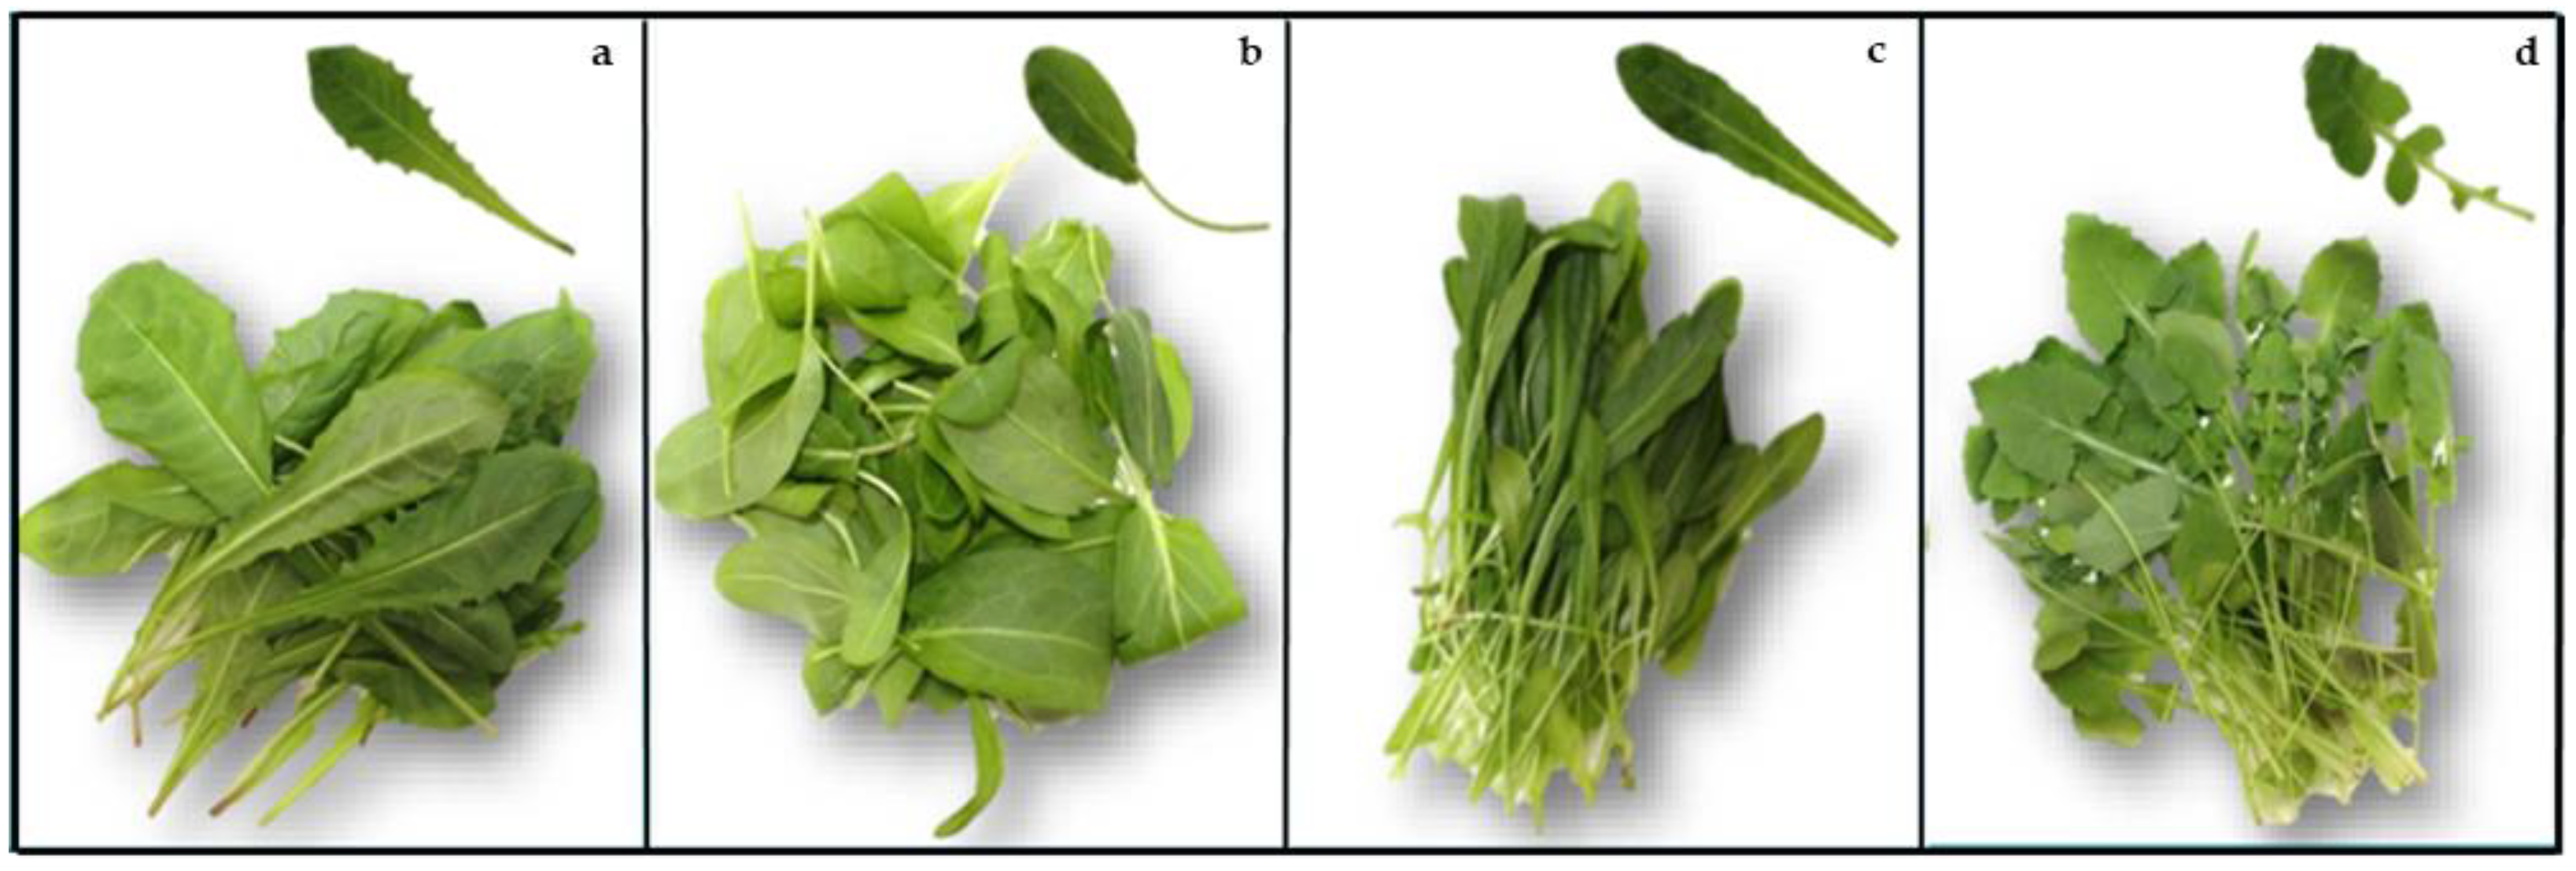 commercial vegetable cutting leafy vegetable Spinach/Parsley